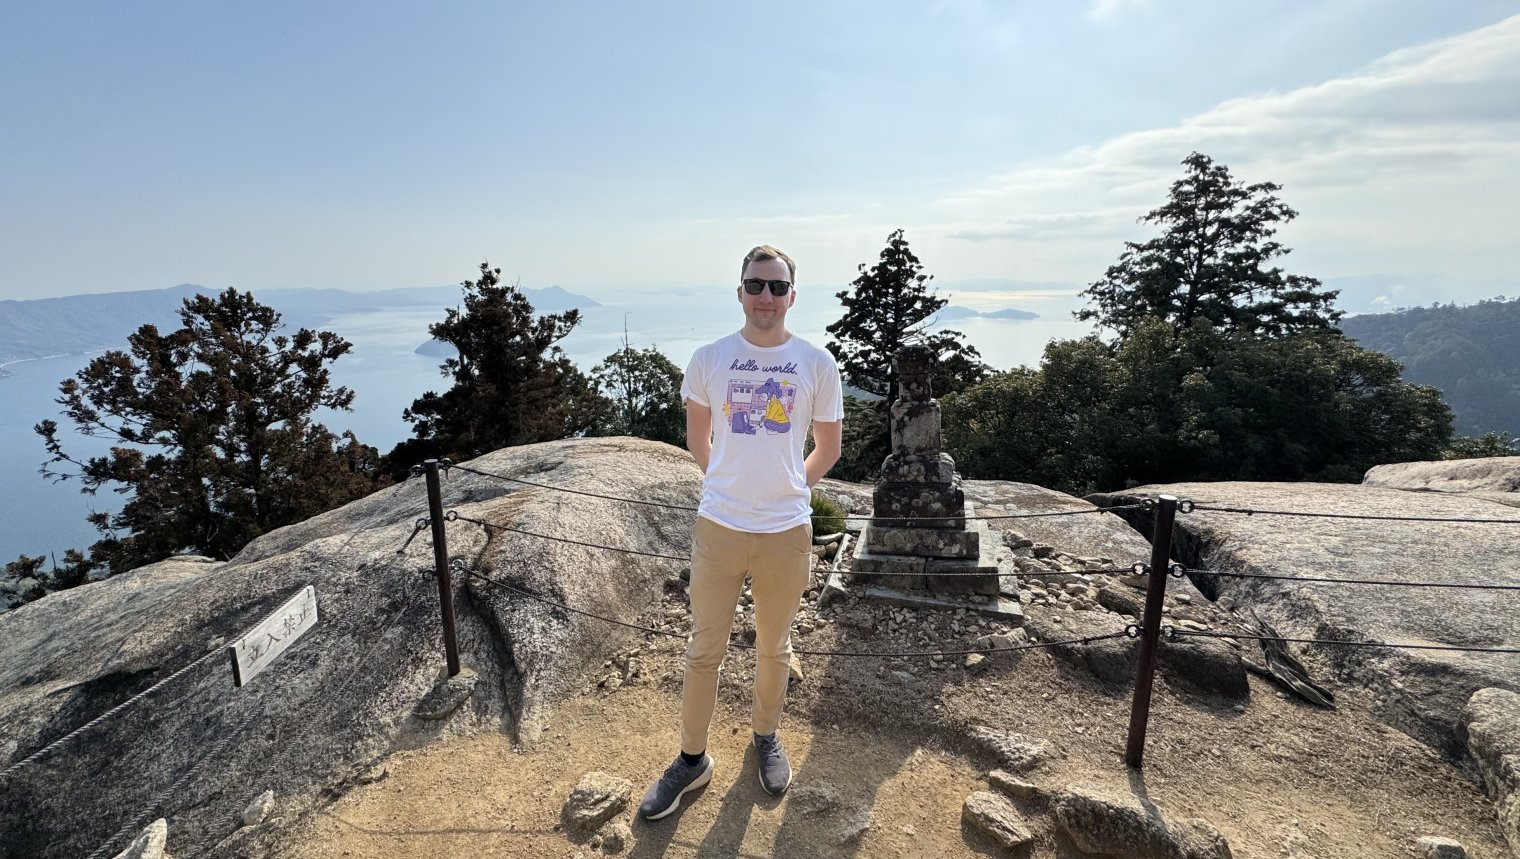 The Gaz standing at the top of Mt. Misen